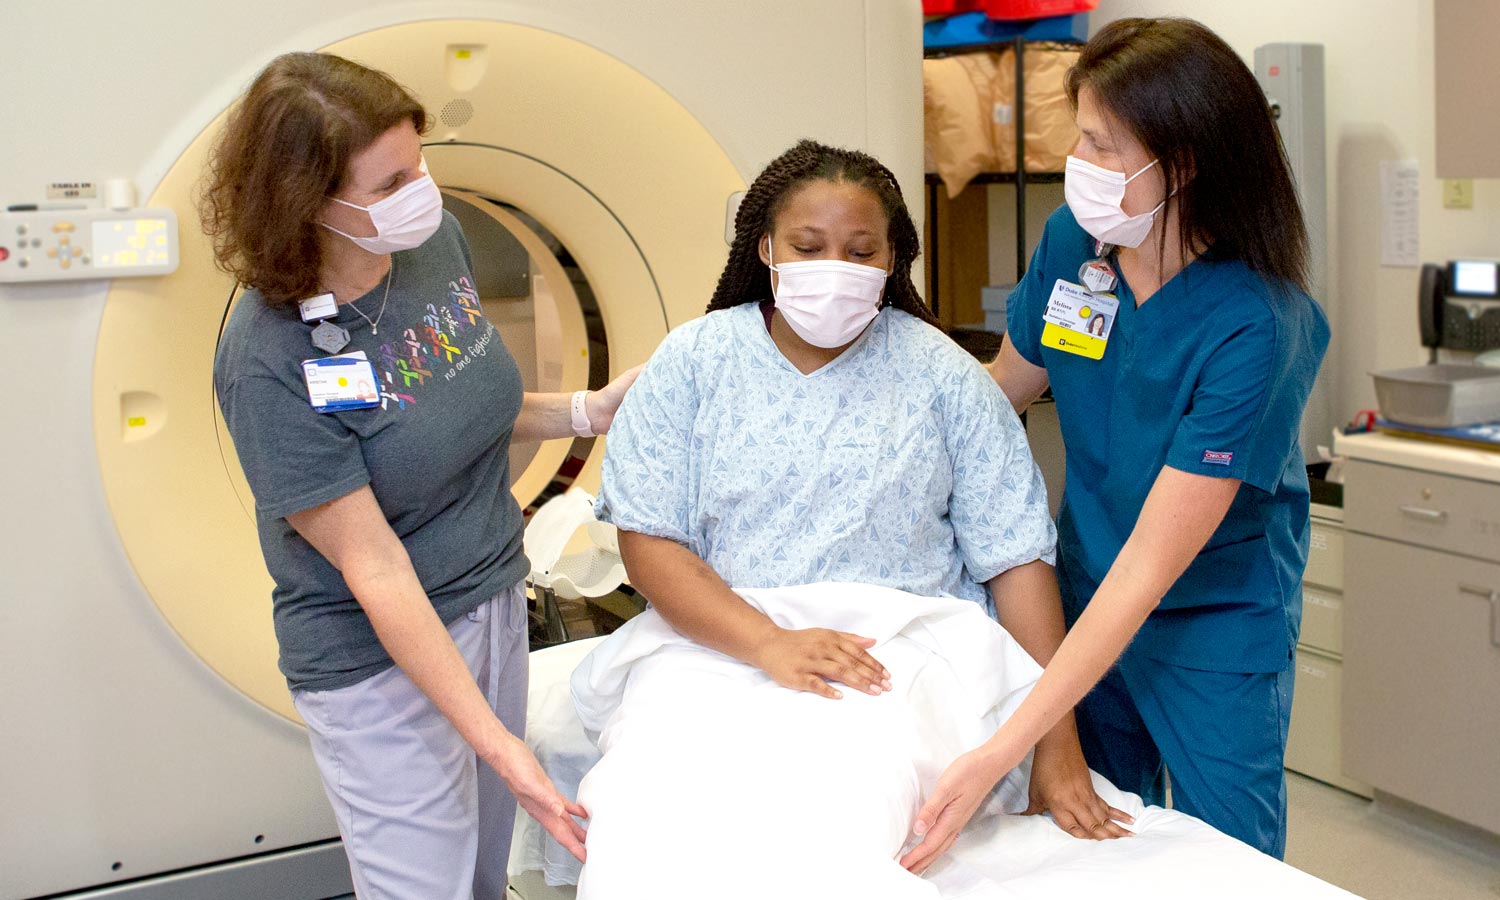 Two providers help a patient get ready for treatment